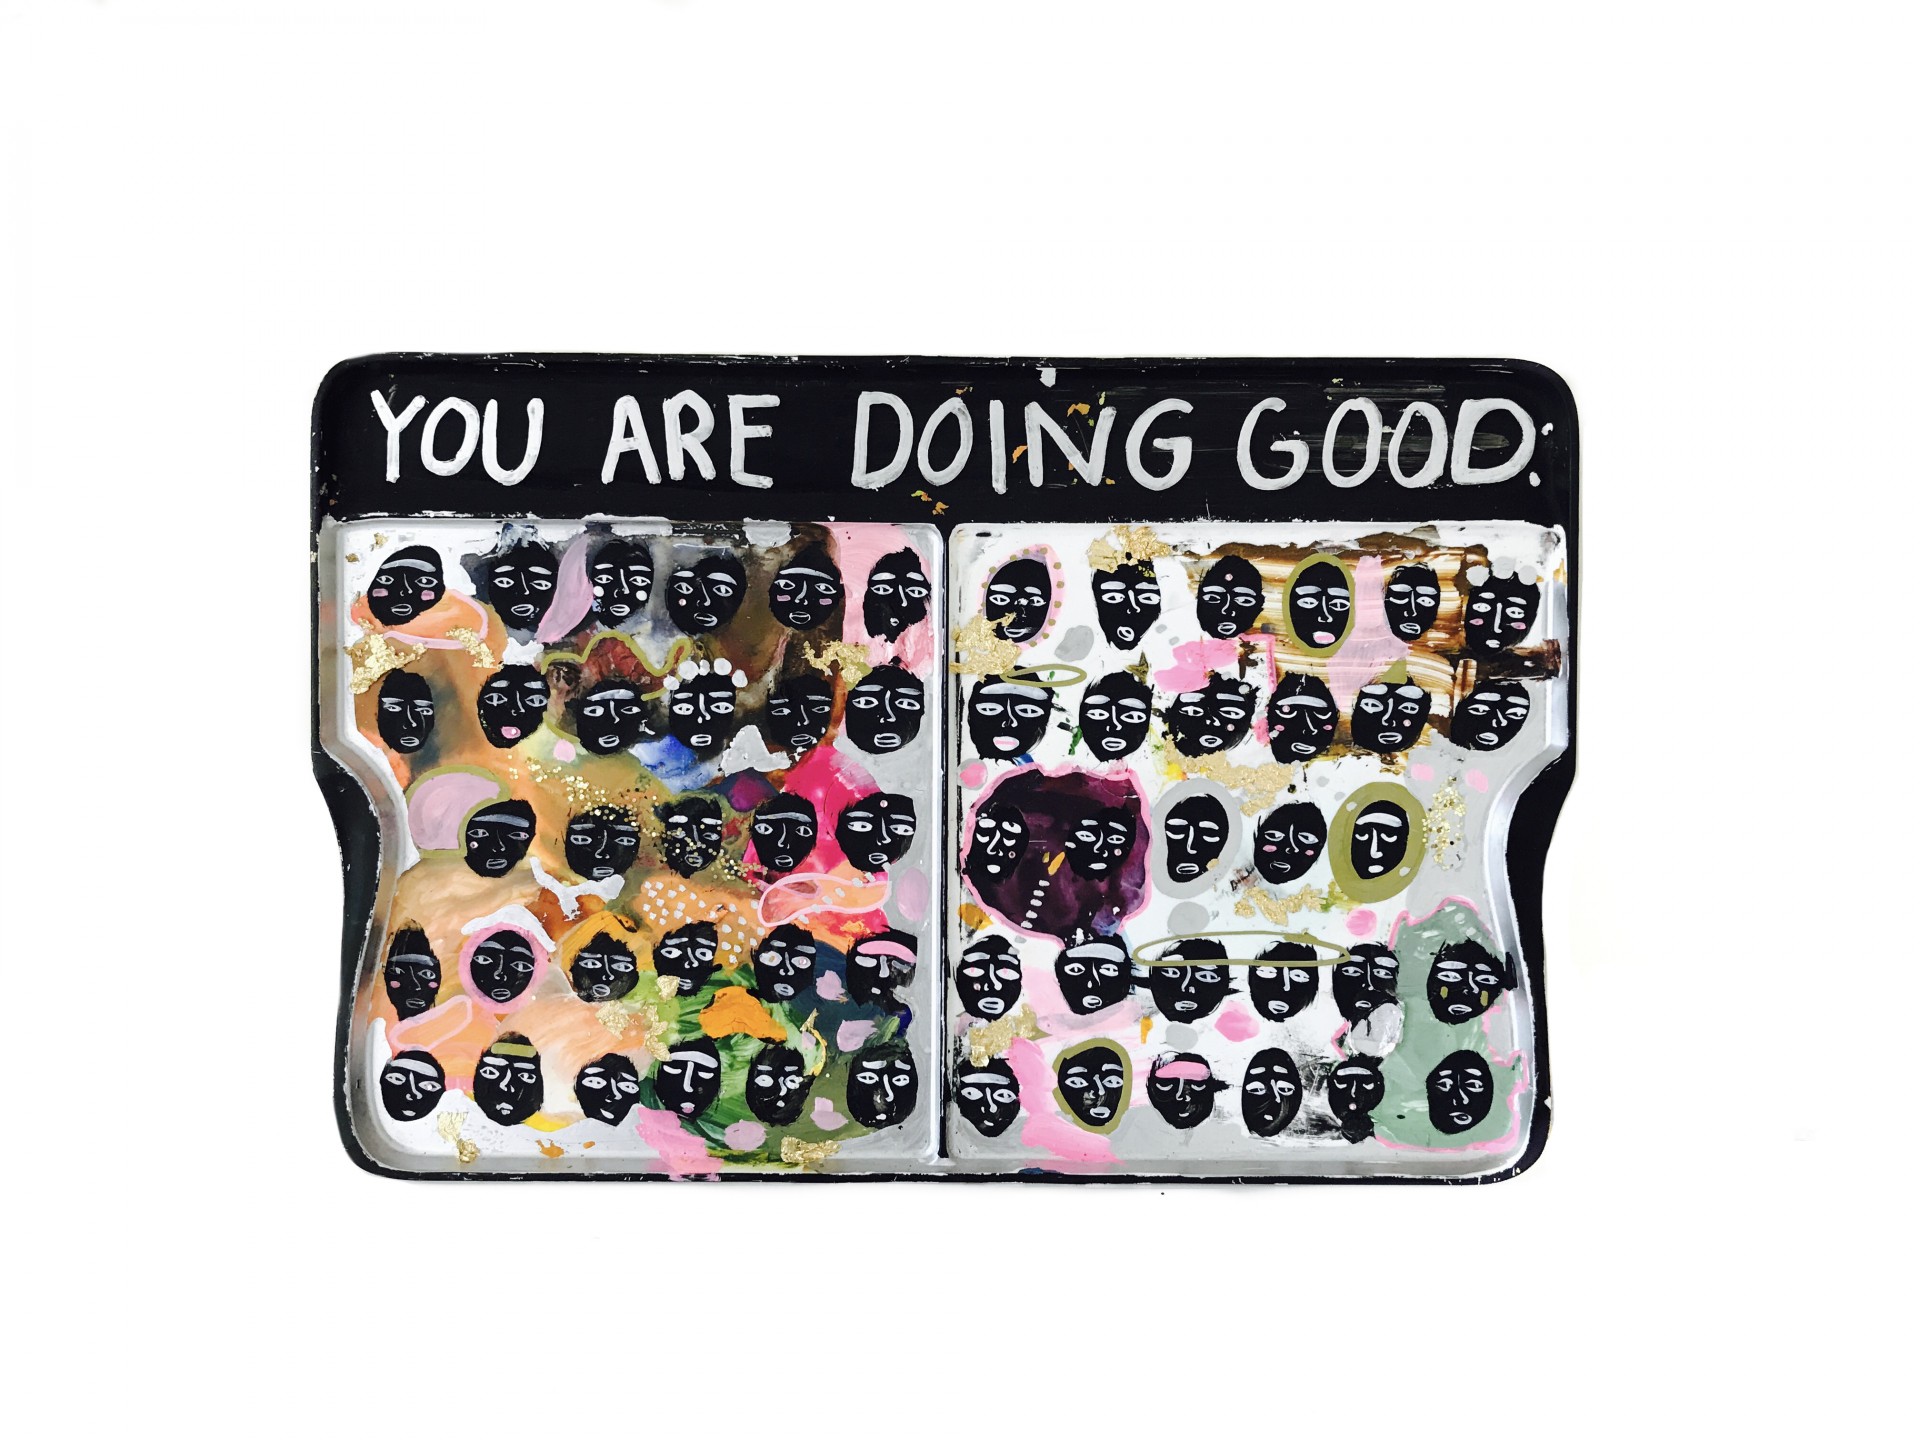 Rectangular palette. Text on top of painting reads "You Are Doing Good" Grid of faces painted in black with various emotions. 